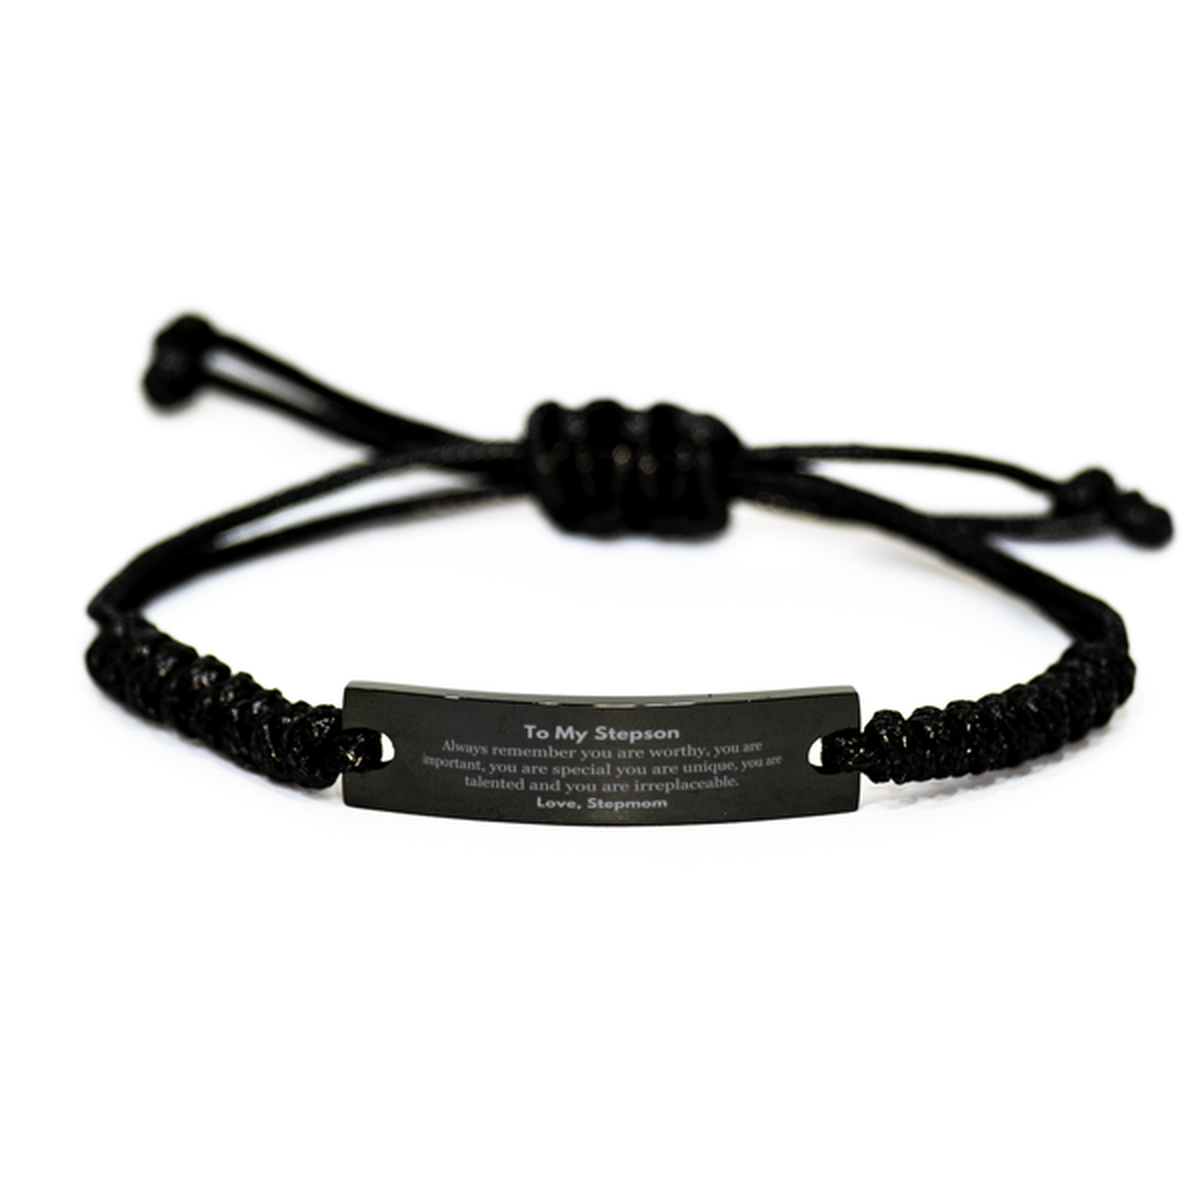 Stepson Birthday Gifts from Stepmom, Inspirational Black Rope Bracelet for Stepson Christmas Graduation Gifts for Stepson Always remember you are worthy, you are important. Love, Stepmom